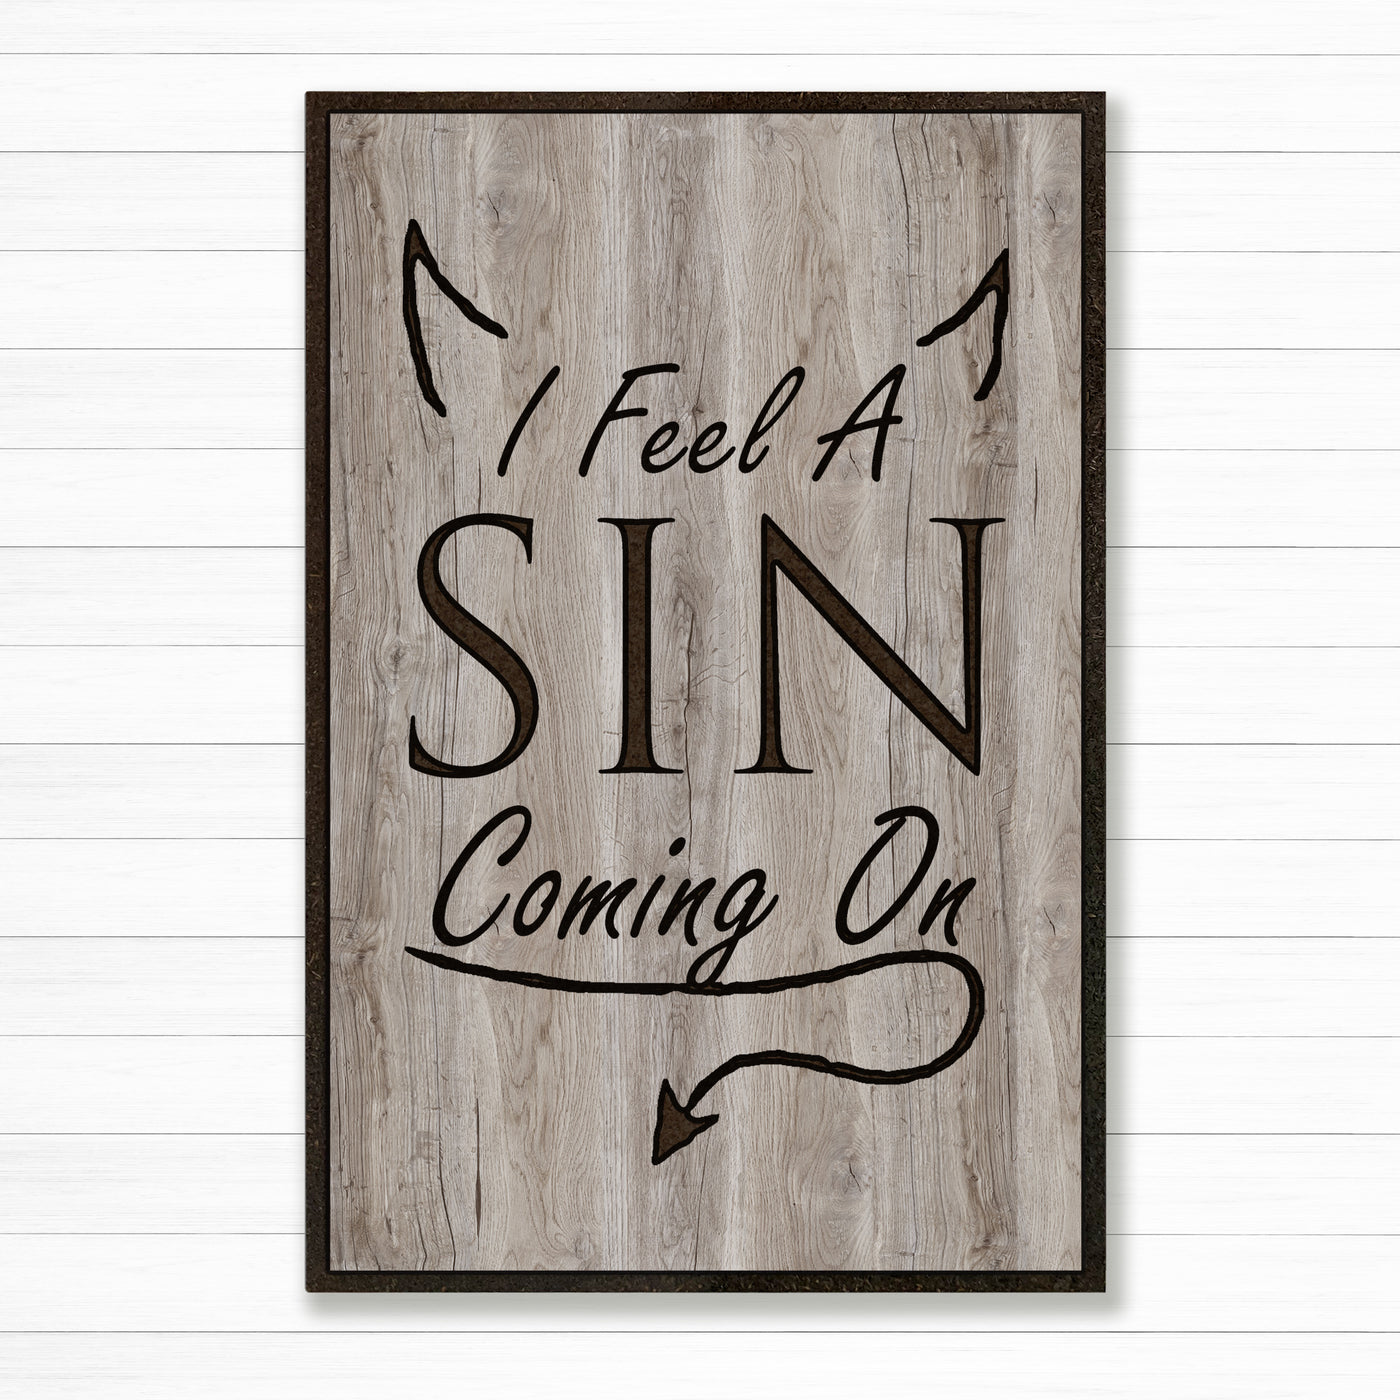 funny humorous quote sign - I feel a sin coming on - custom wood carved modern farmhouse vintage sign